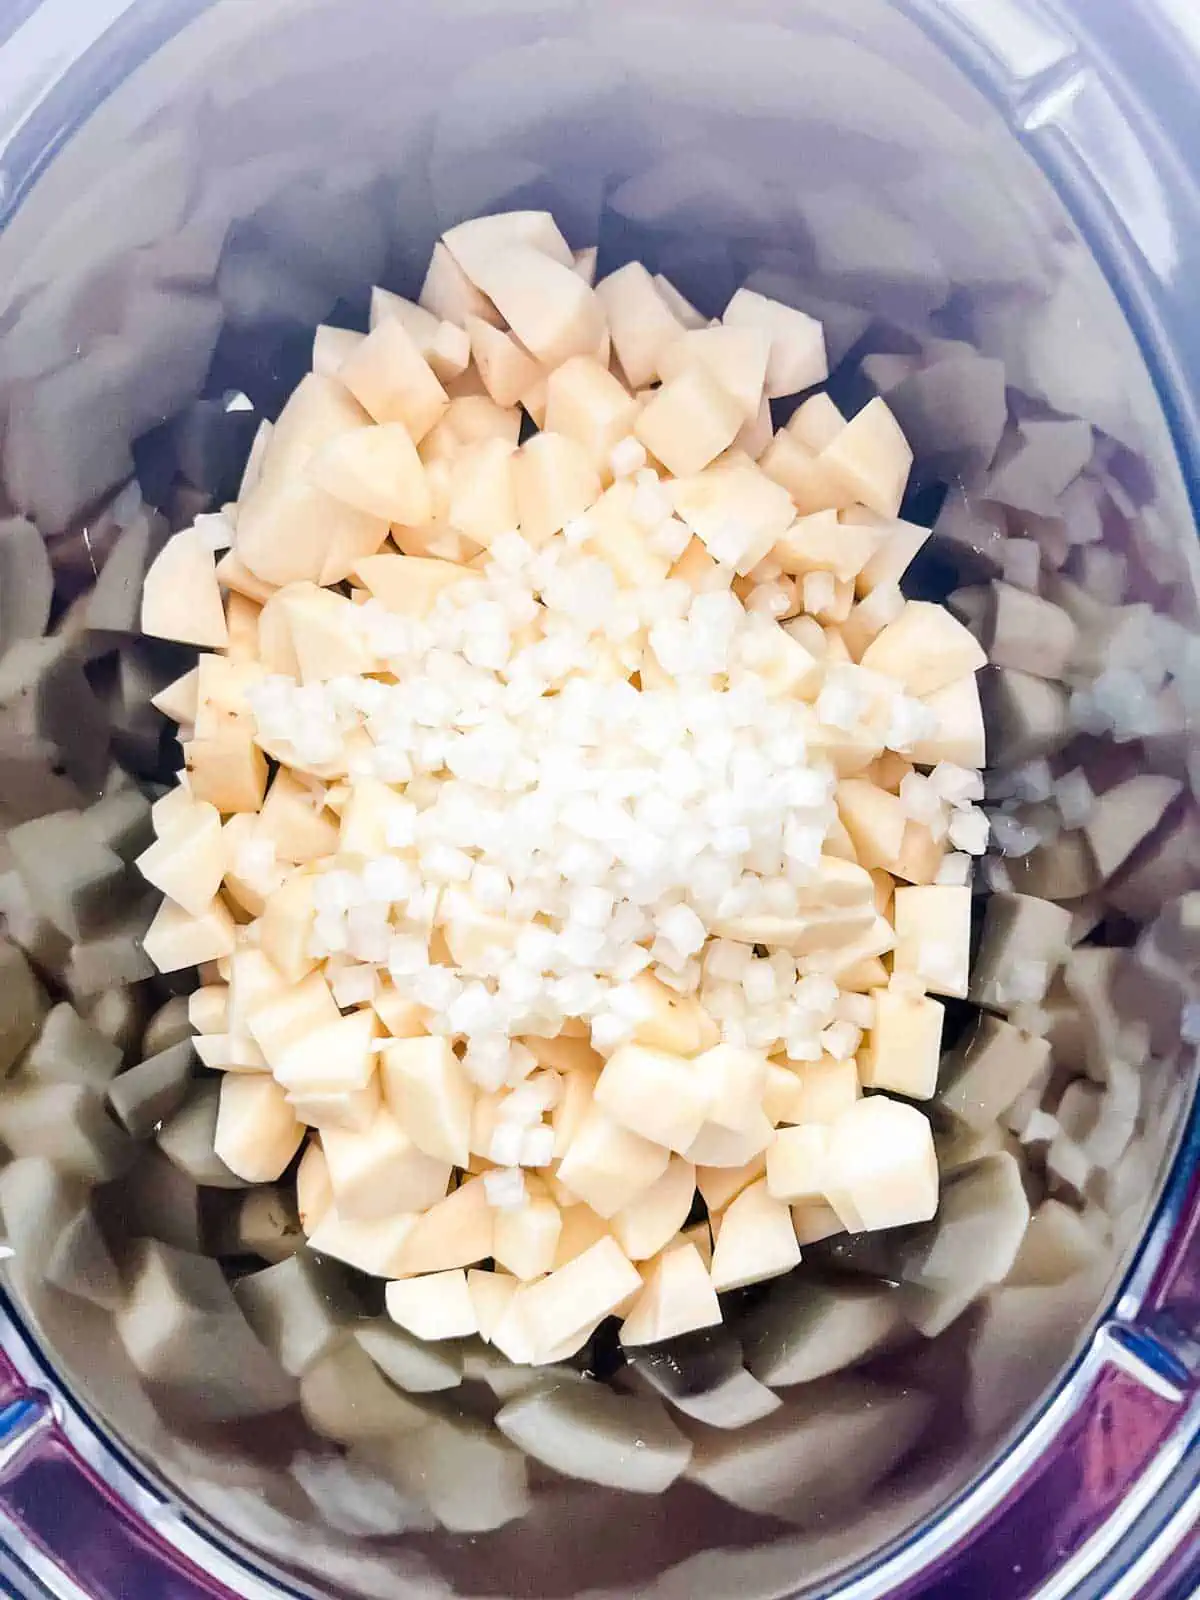 Photo of diced potatoes and onion in a slow cooker.